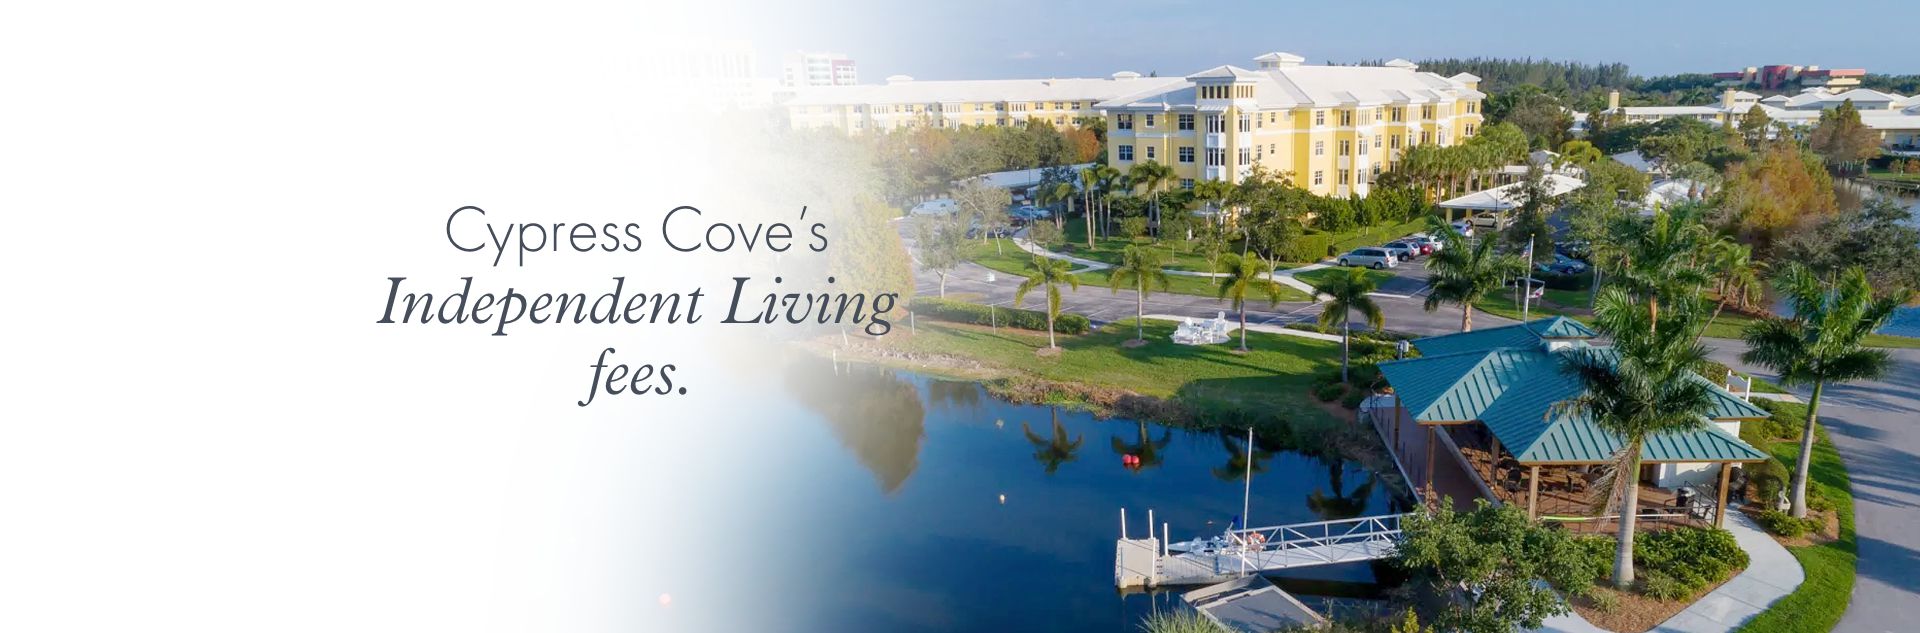 Cypress Cove Independent Living Fees.